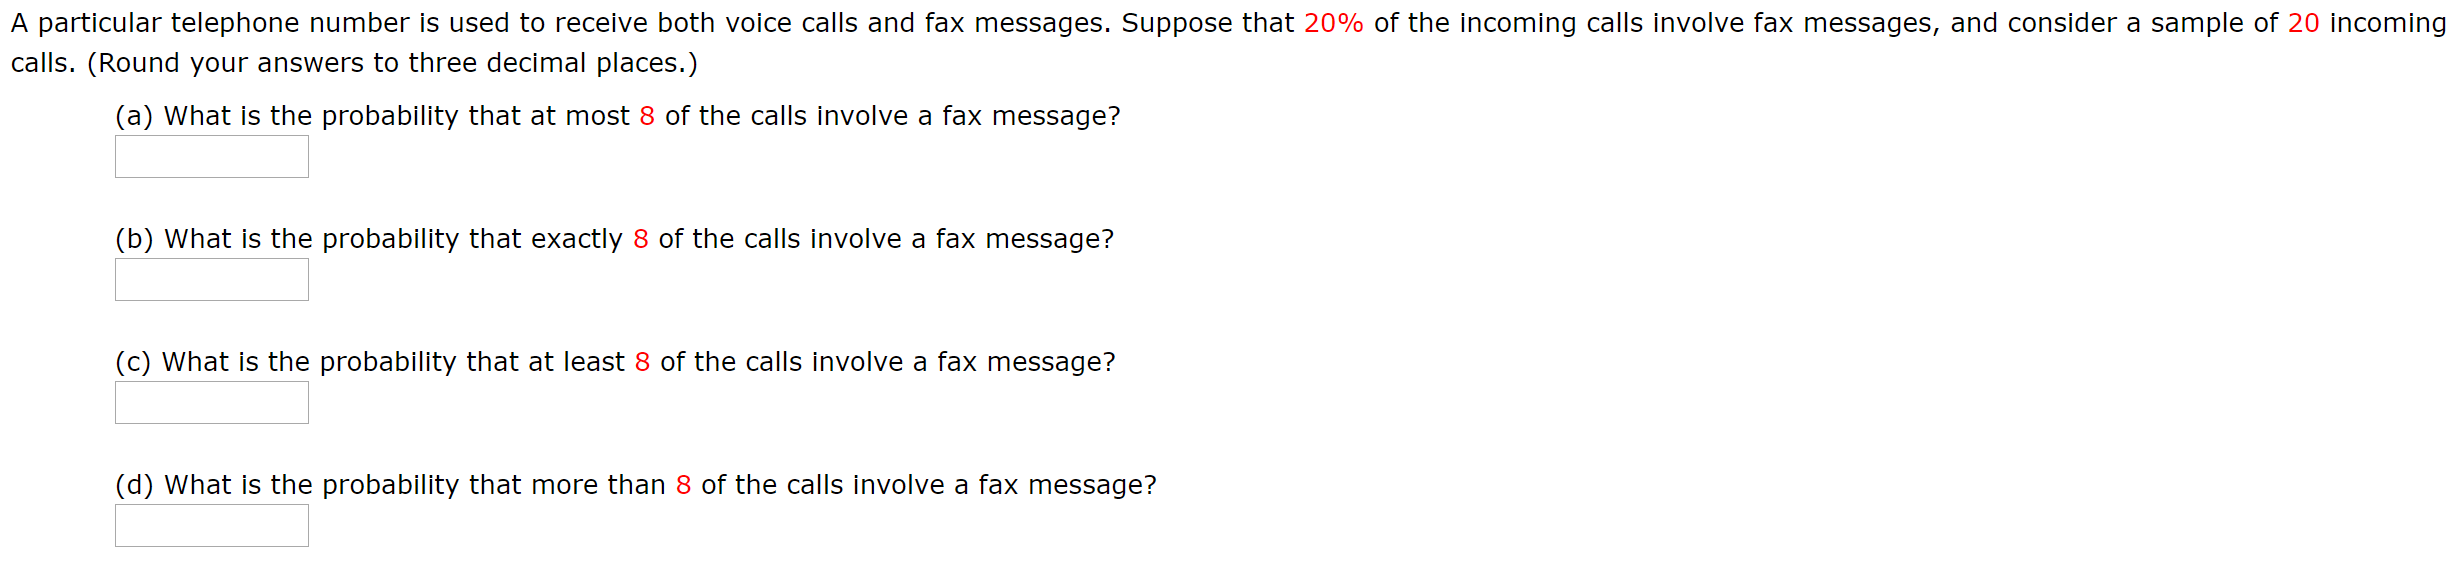 A particular telephone number is used to receive both voice calls and fax messages. Suppose that 20% of the incoming calls involve fax messages, and consider a sample of 20 incoming
calls. (Round your answers to three decimal places.)
(a) What is the probability that at most 8 of the calls involve a fax message?
(b) What is the probability that exactly 8 of the calls involve a fax message?
(c) What is the probability that at least 8 of the calls involve a fax message?
(d) What is the probability that more than 8 of the calls involve a fax message?
